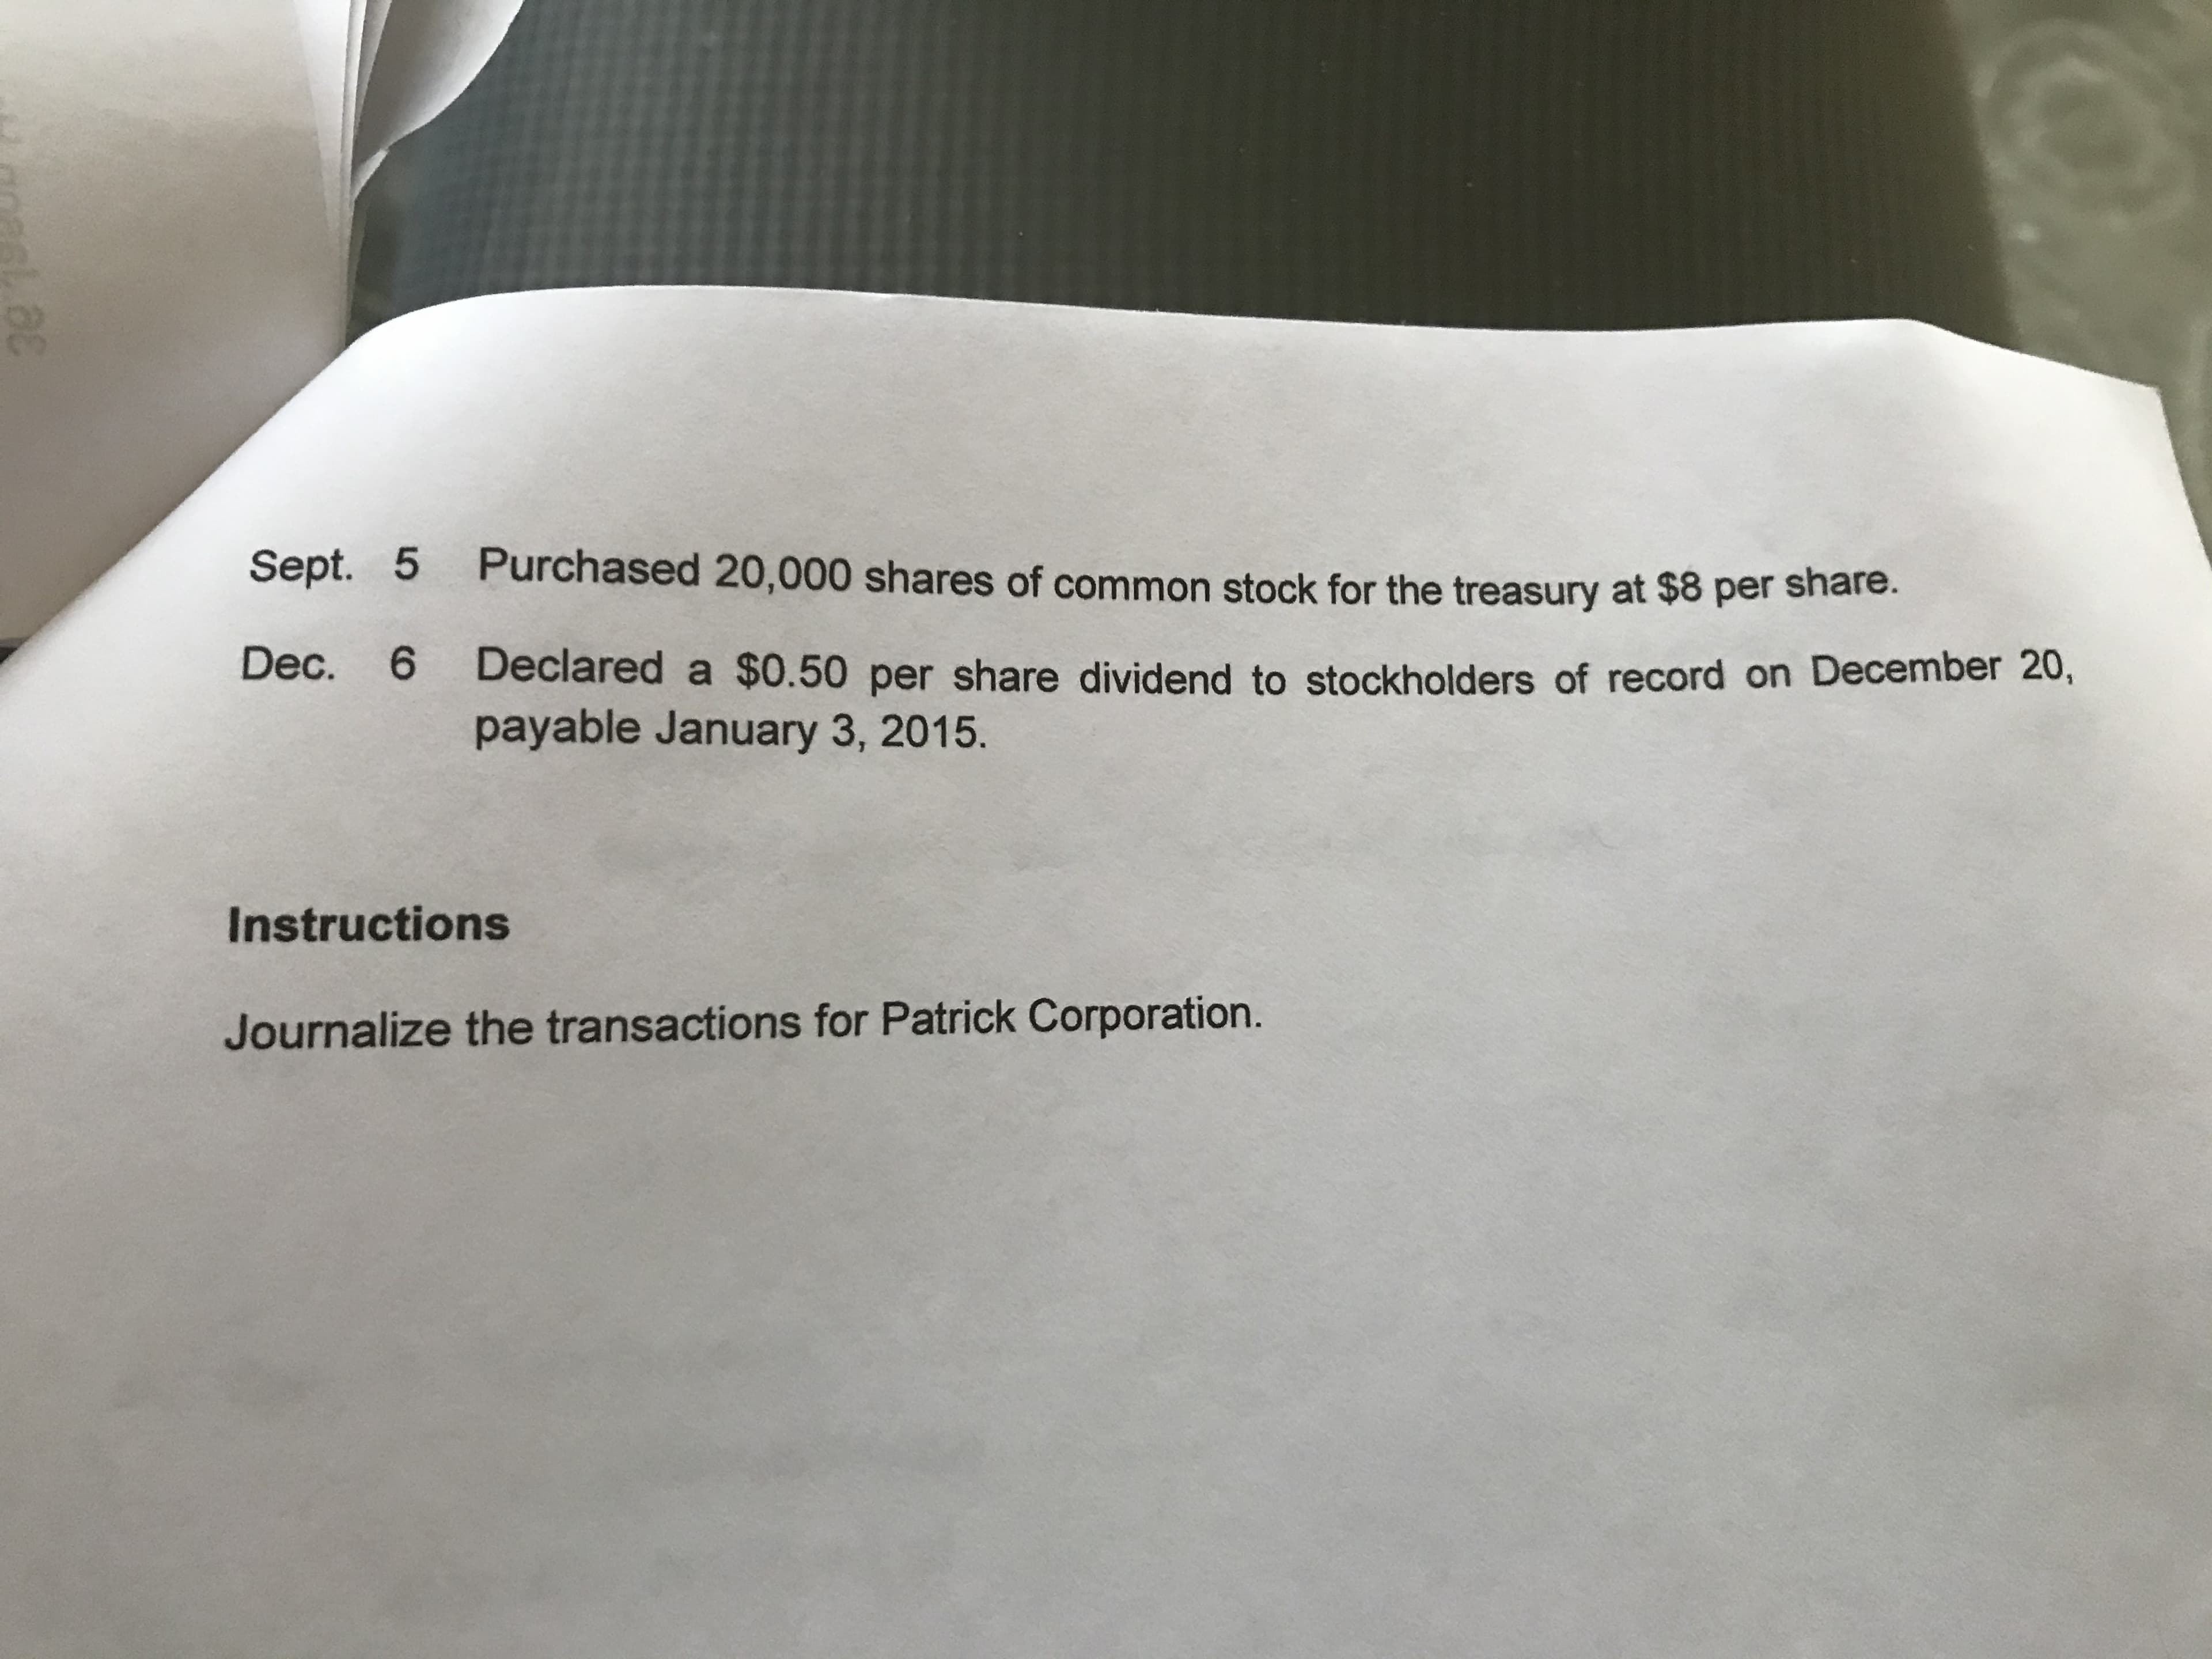 329
Sept. 5 Purchased 20,000 shares of common stock for the treasury at $8 per snare.
Dec. 6 Declared a $0.50 per share dividend to stockholders of record on December 20,
payable January 3, 2015.
Instructions
Journalize the transactions for Patrick Corporation.
